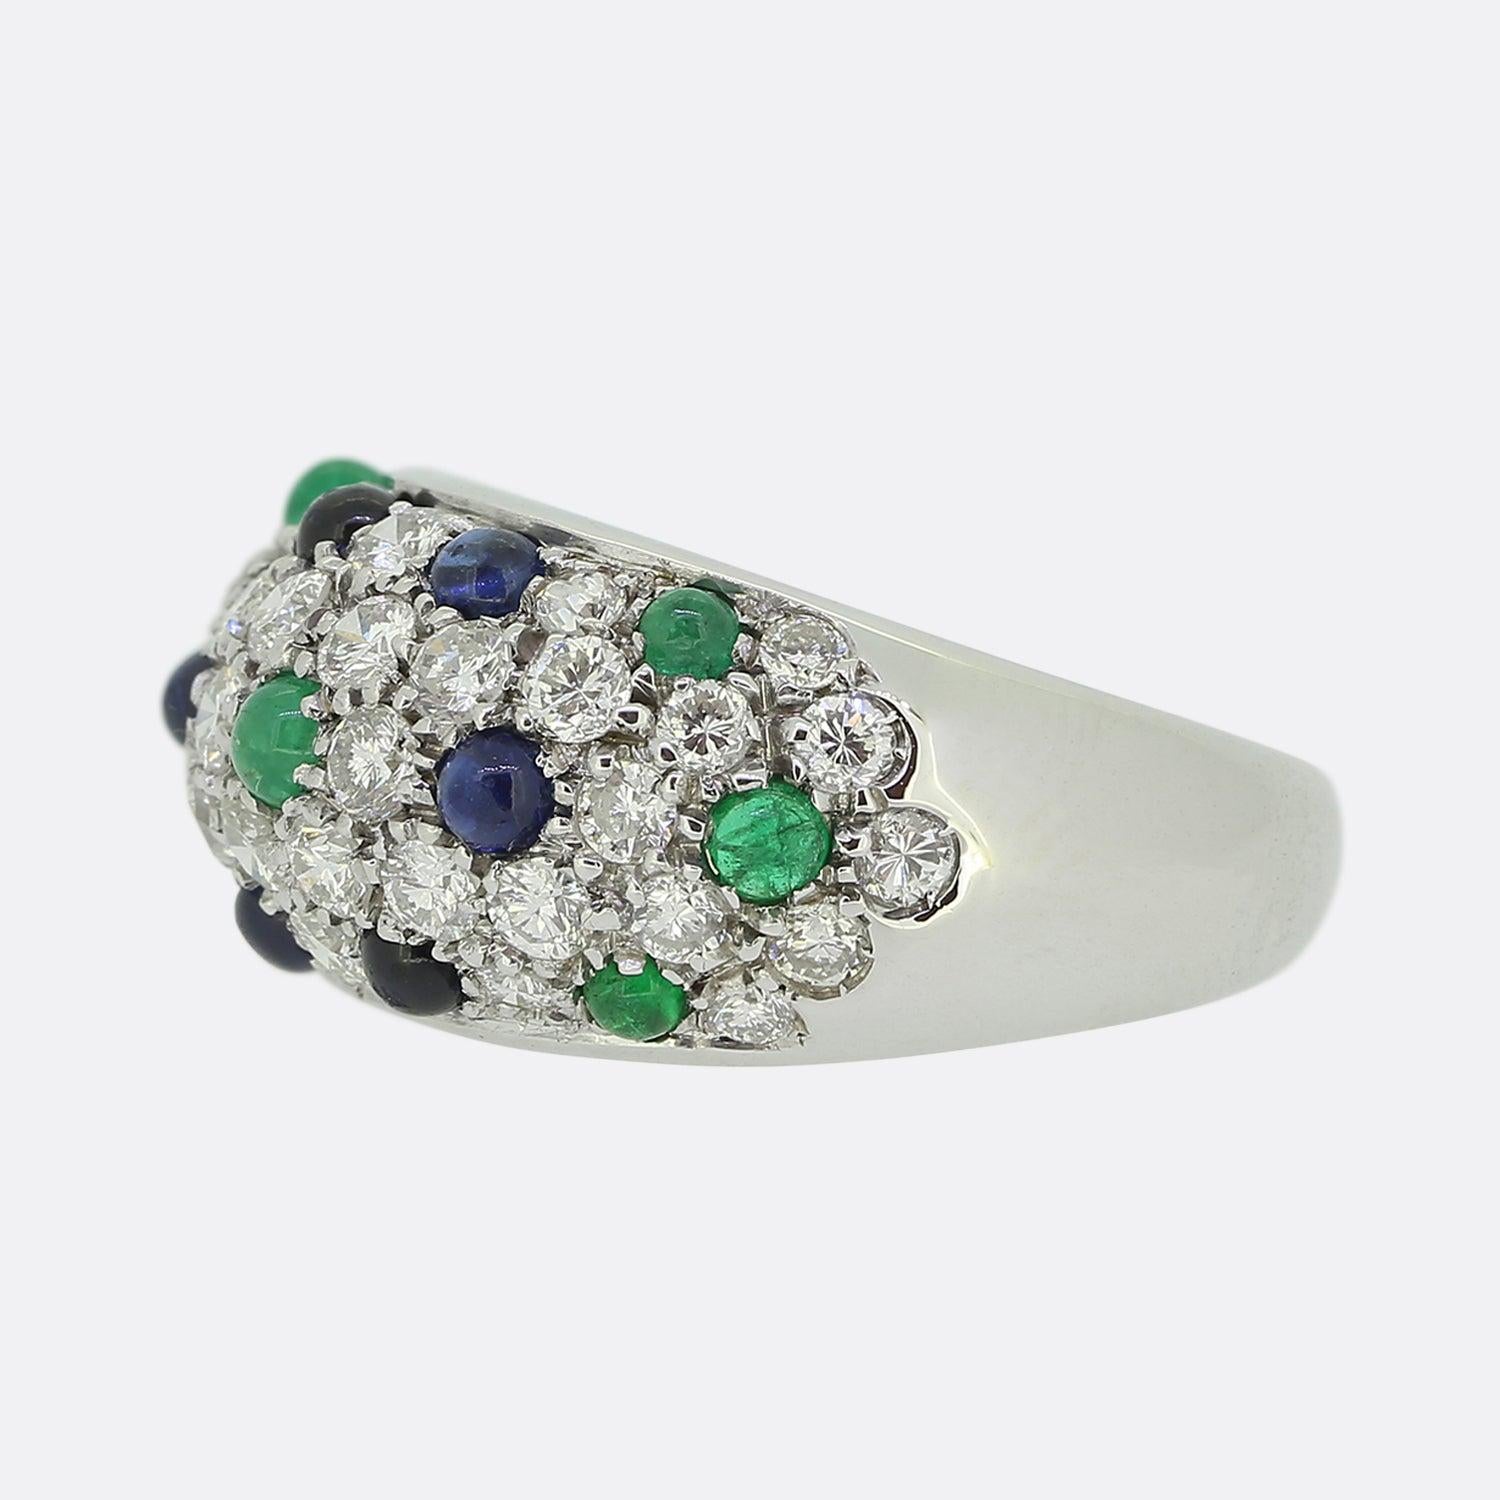 This is a wonderfully rare multi gemstone ring from the world renowned, luxury jewellery house of Cartier. This vintage piece has been crafted from 18ct white gold and showcases a pavé diamond set face with sequential cabochon sapphires and emeralds